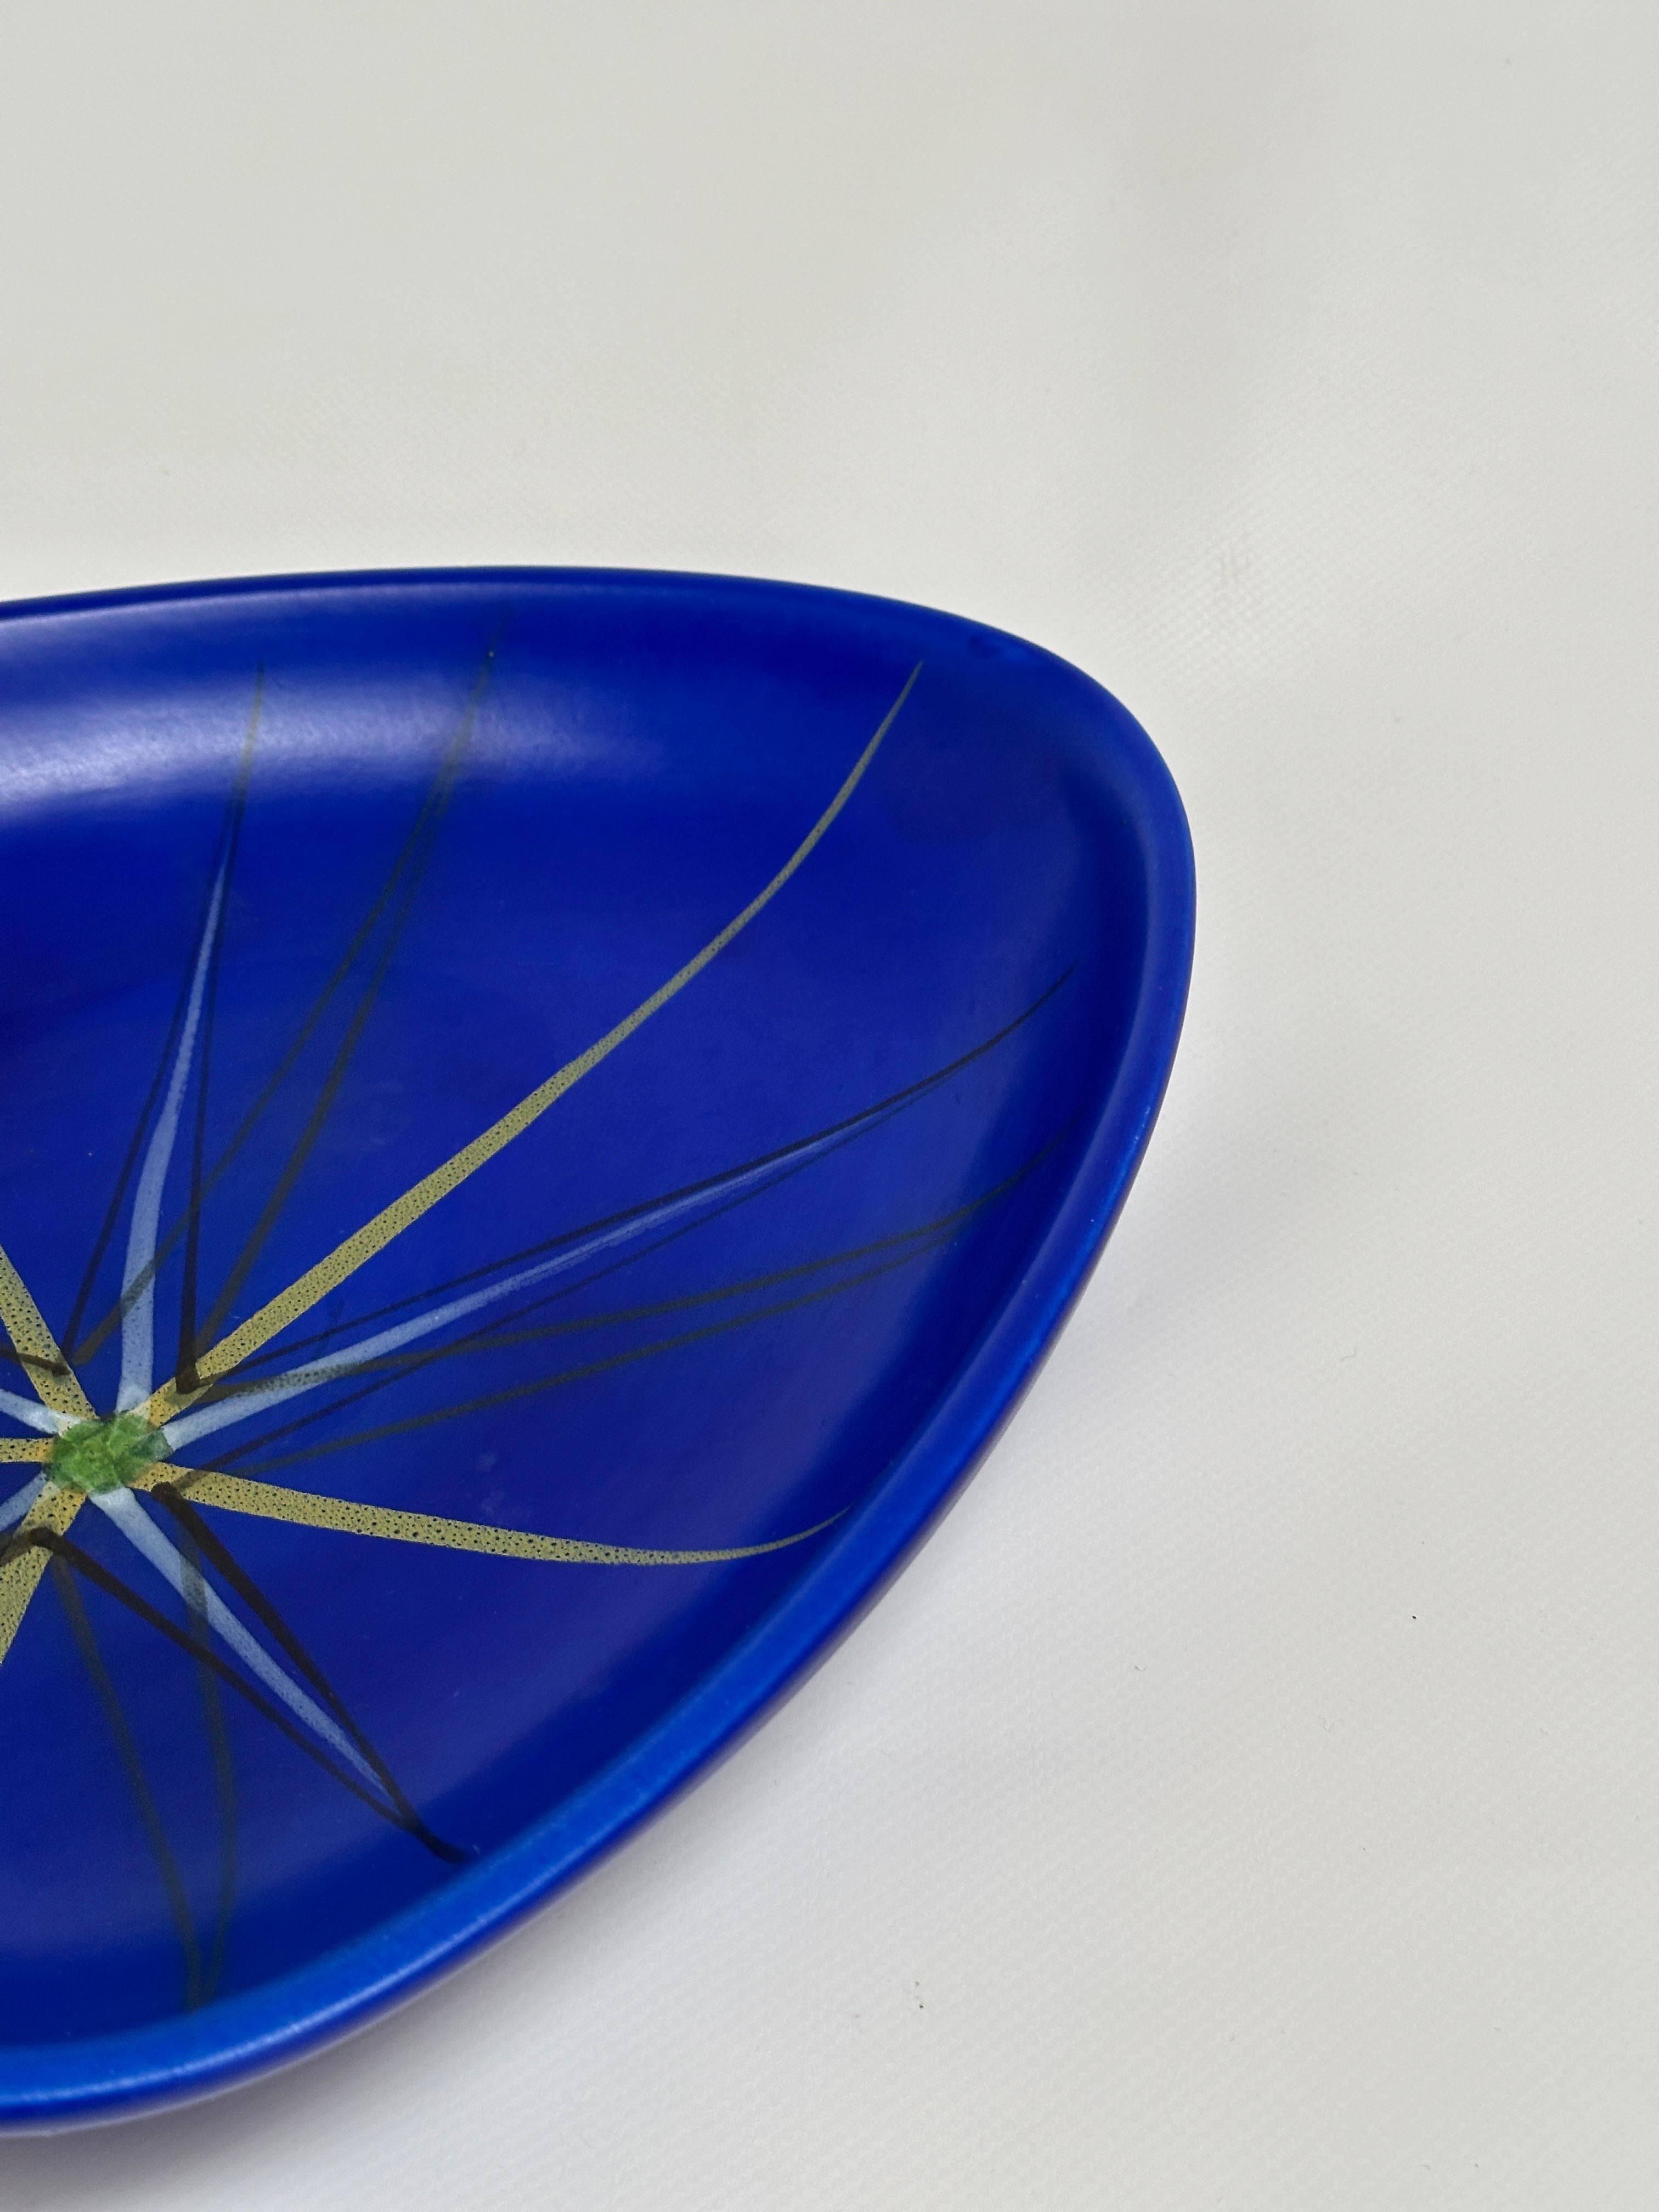 Mid-20th Century Large Free-Form Decorative Bowl, Andre Baud, Vallauris c. 1950 For Sale